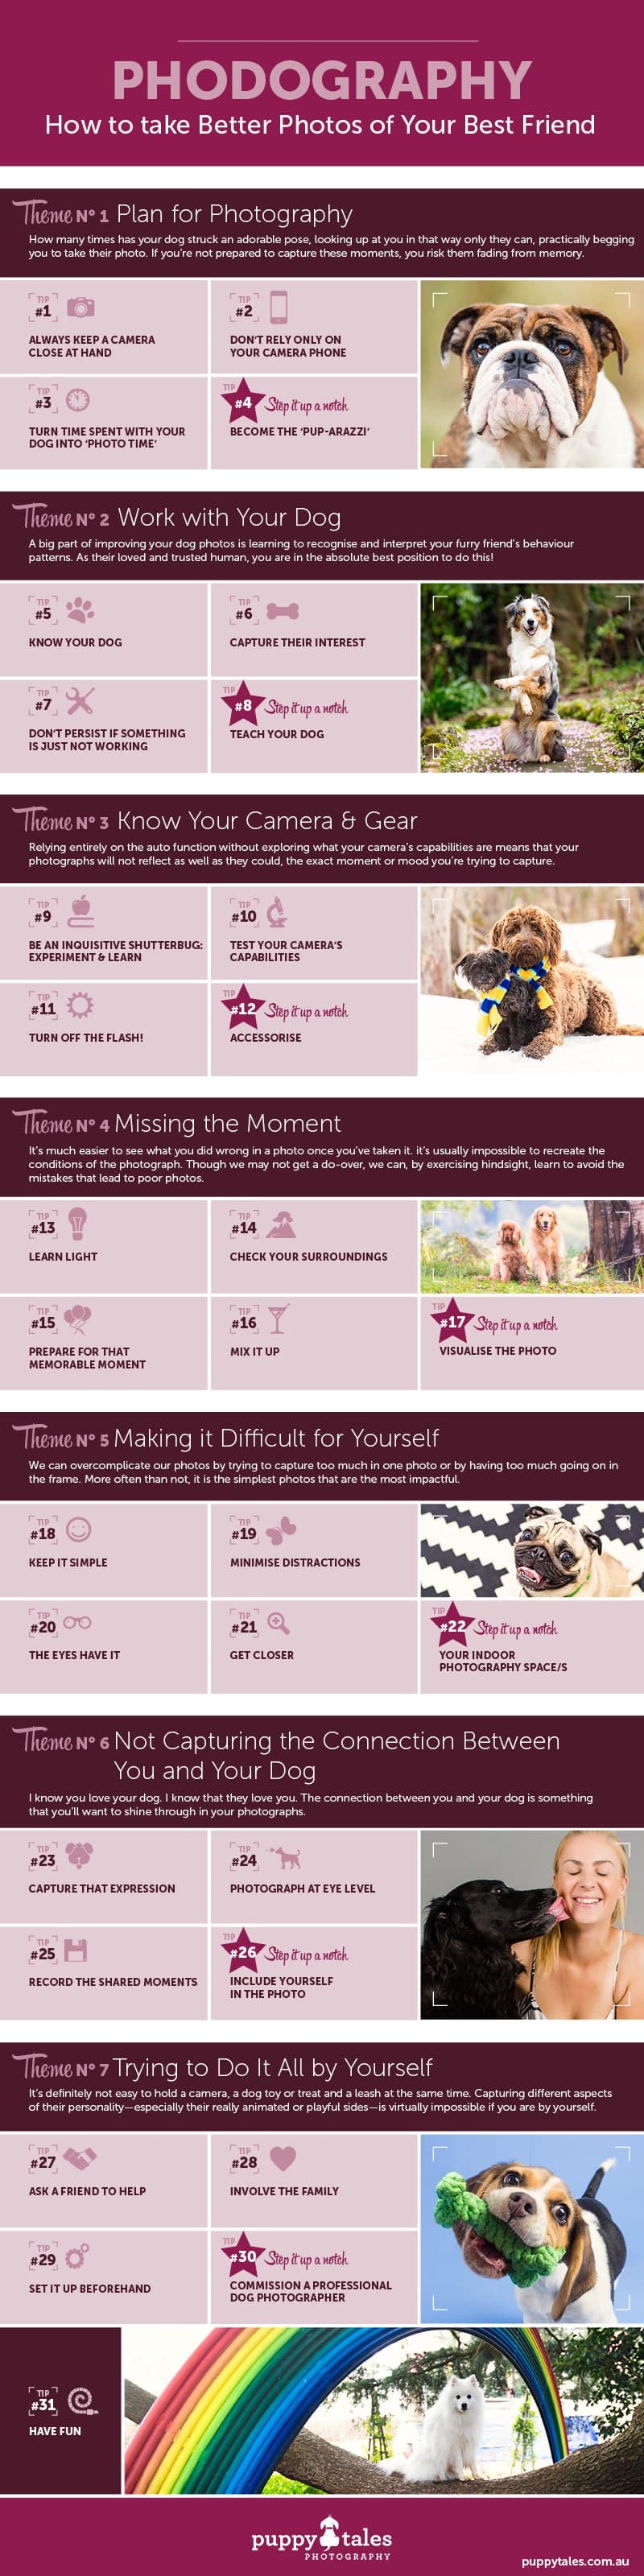 Phodography How to take Better Photos of your Best Friend Infographic Internet